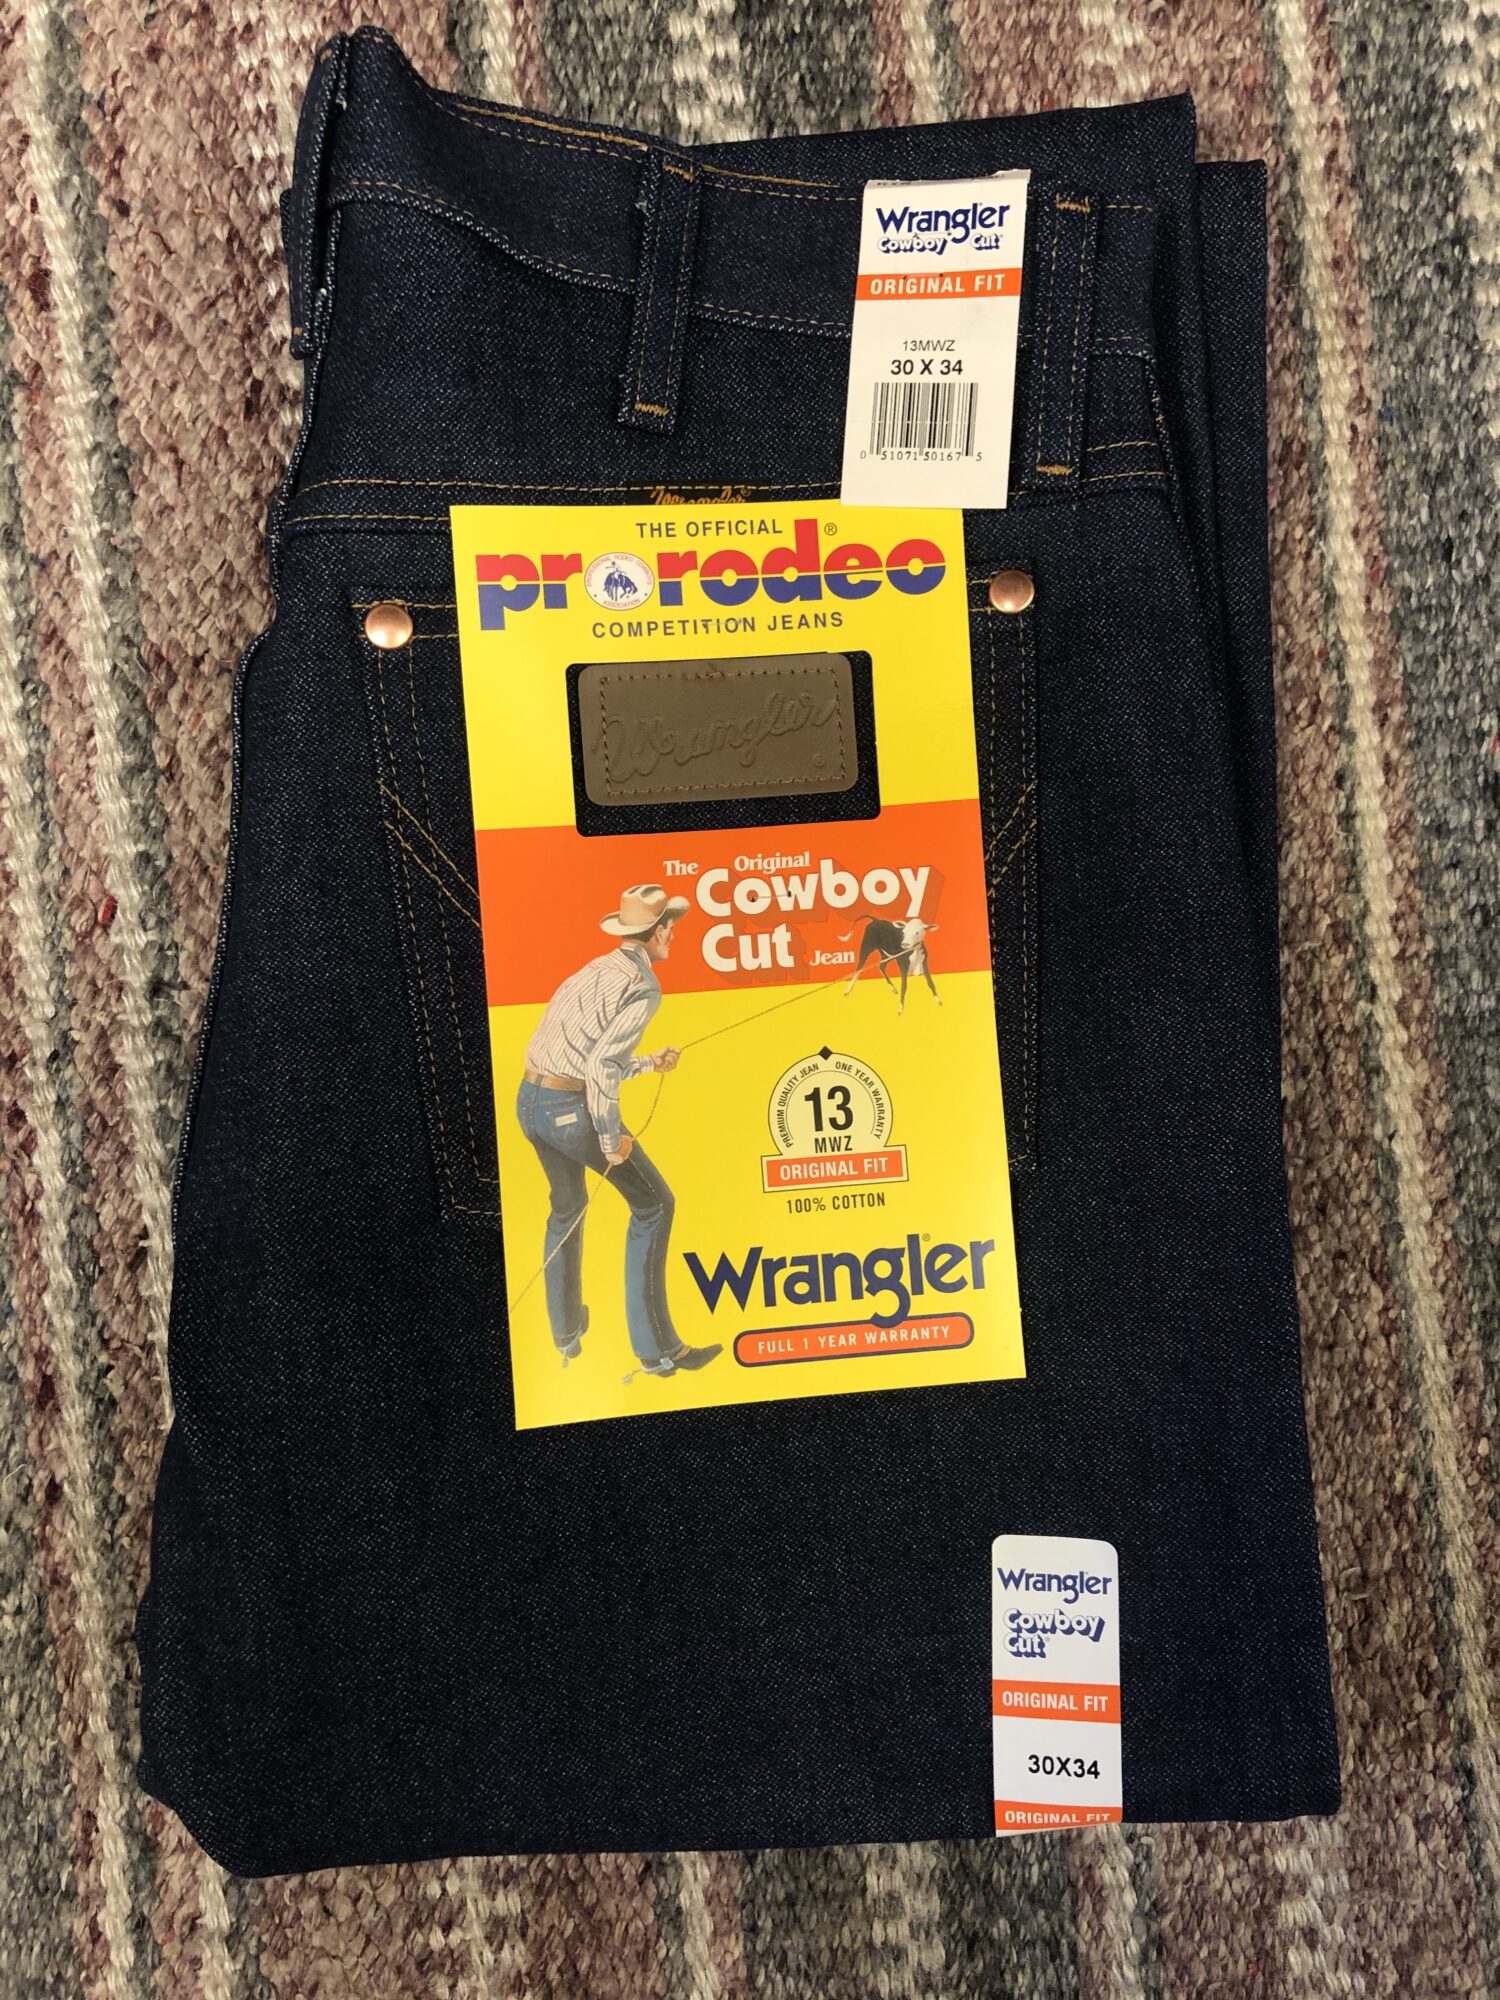 Wrangler Cowboy Cut Original Fit Jean - Support Local - Chico Support ...